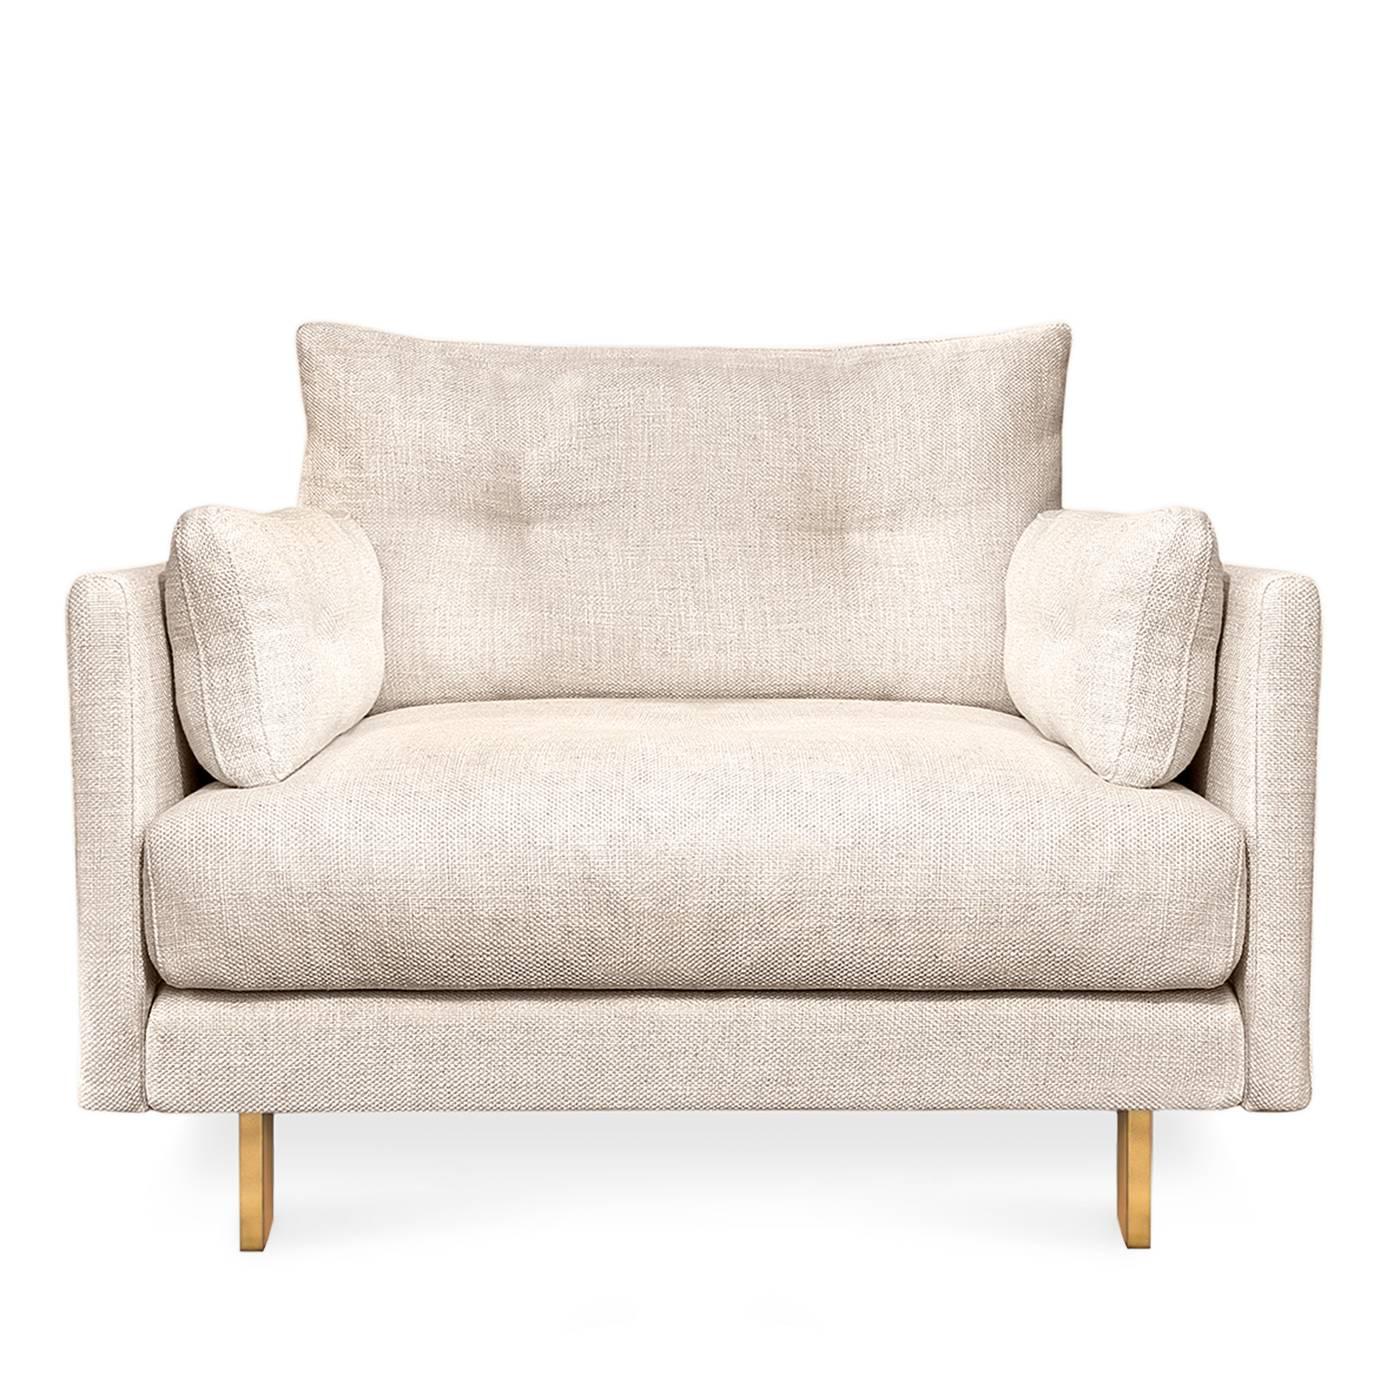 California Modern. Deep and squishy, family-friendly, and très chic—you can have it all. Upholstered in Mulholland Pearl bouclé with minimal brushed brass legs. Combine details like inviting pin-tucked back and side cushions, with removable,